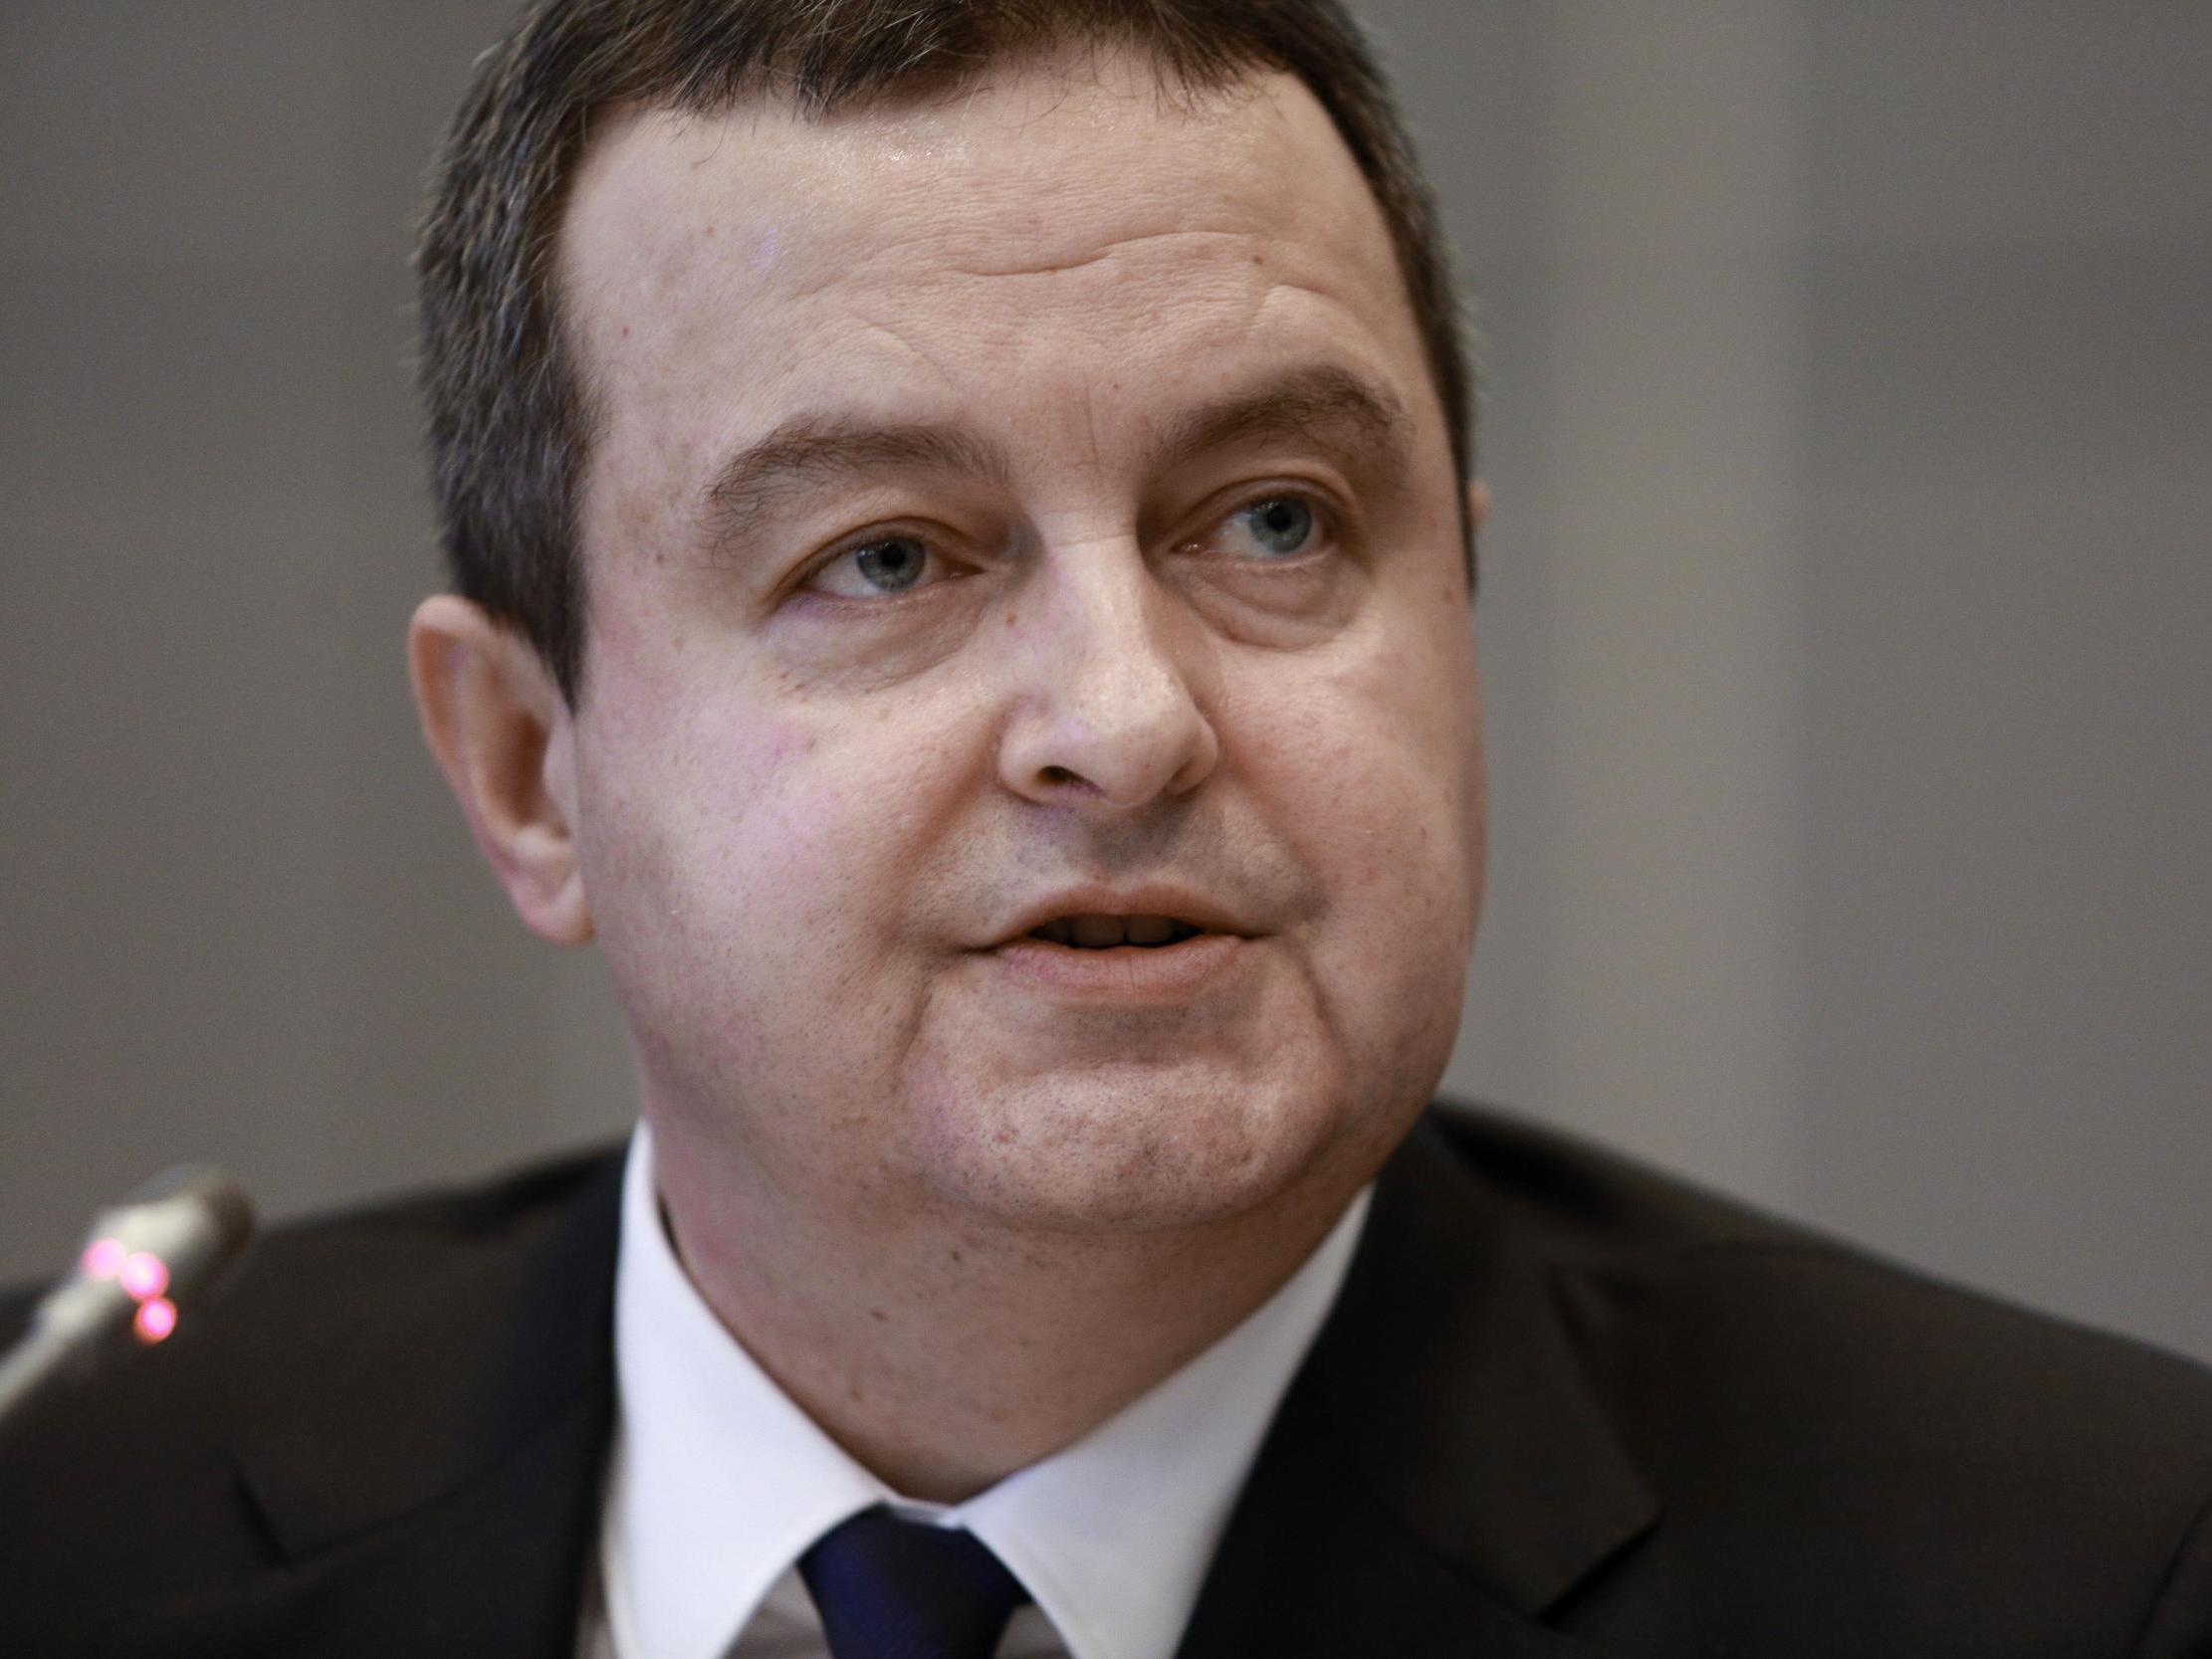 Ivica Dacic made the comments on Thursday